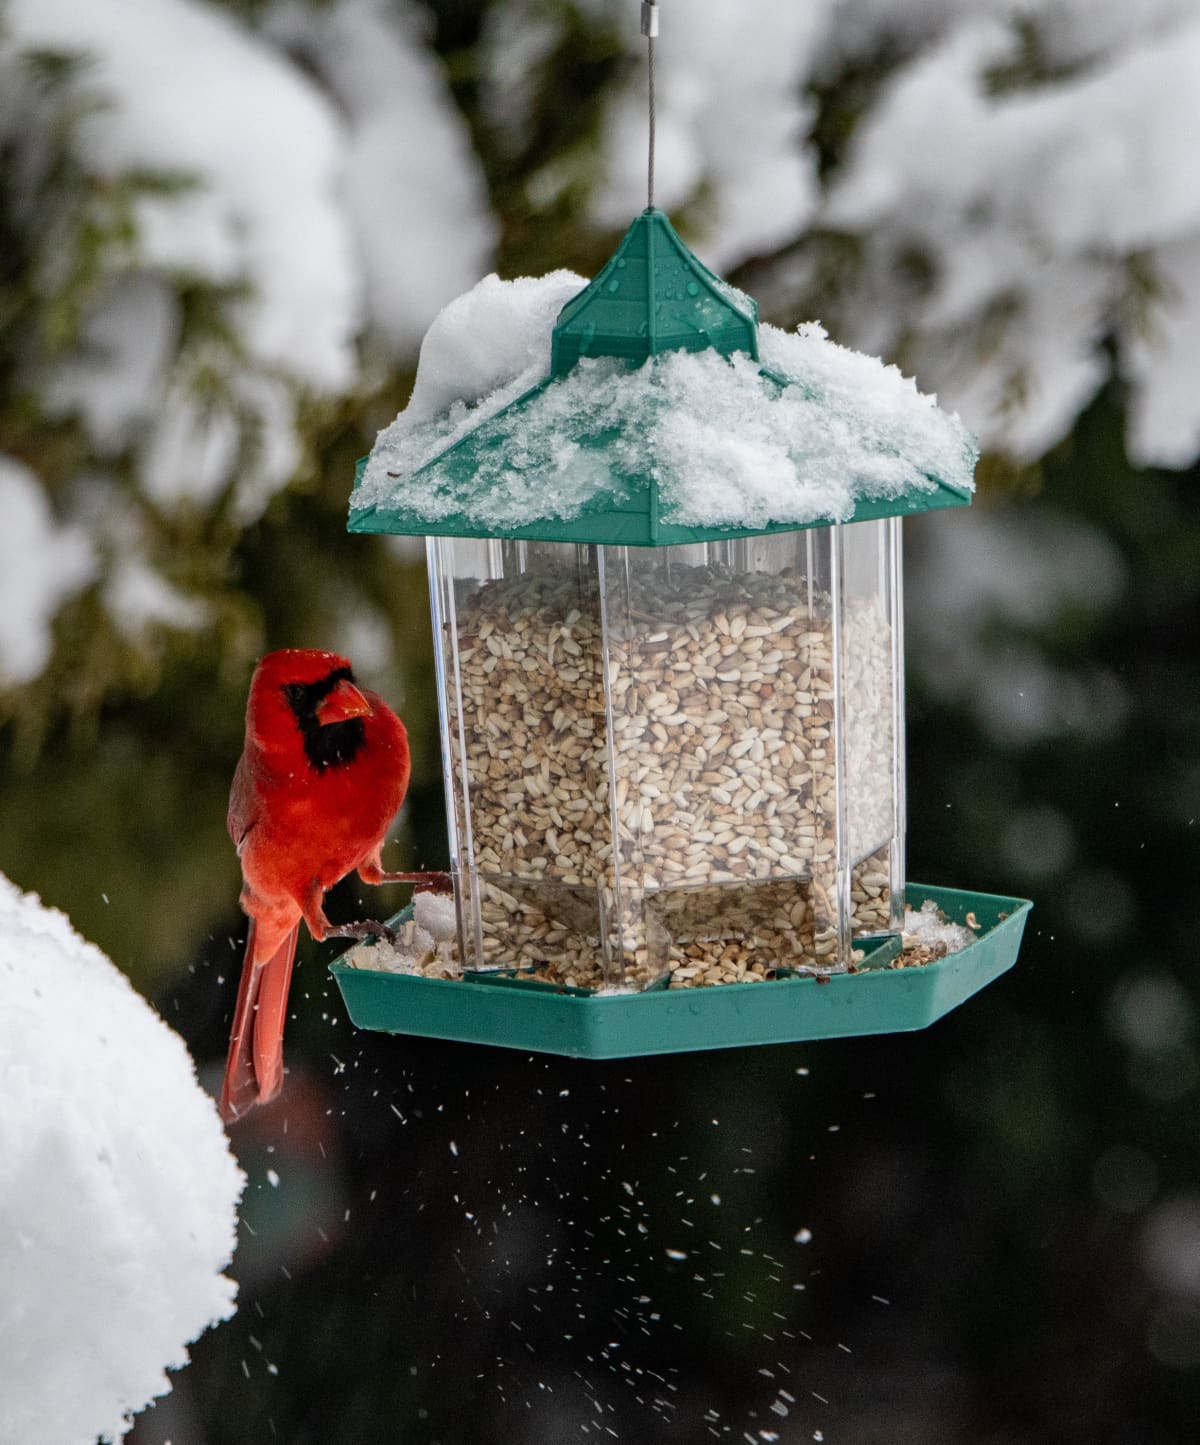 A red cardinal perched on a backyard bird feeder full of seeds